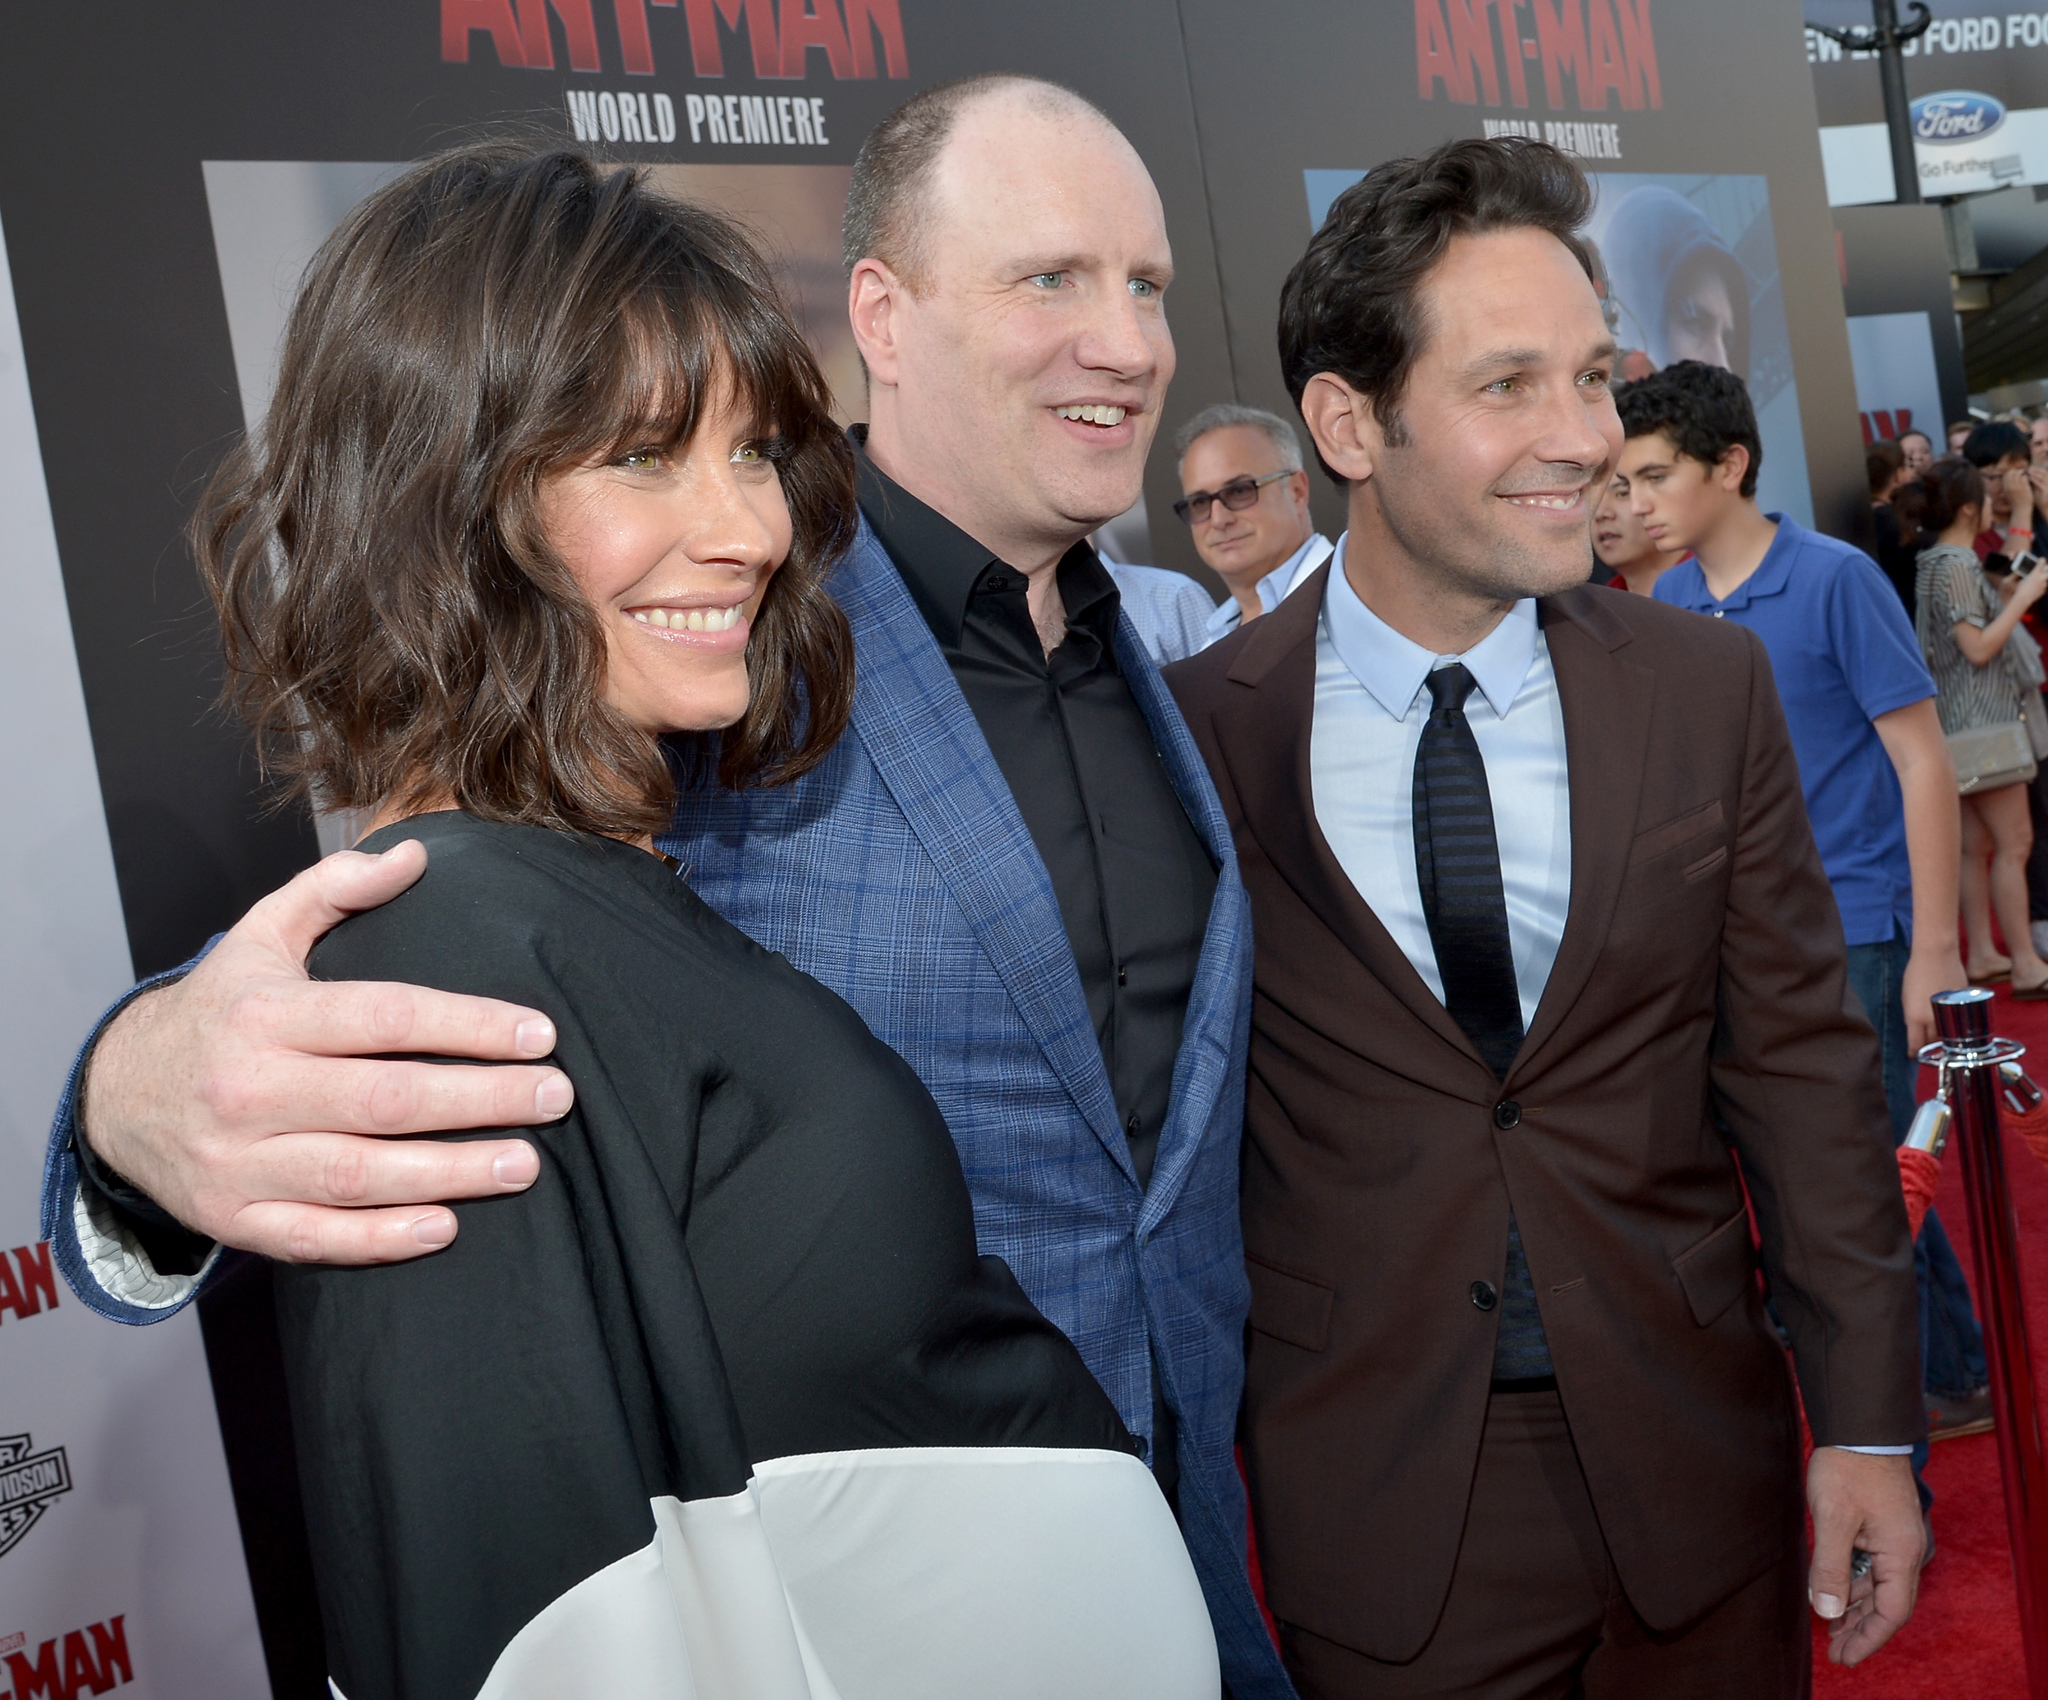 Kevin Feige, Paul Rudd and Evangeline Lilly